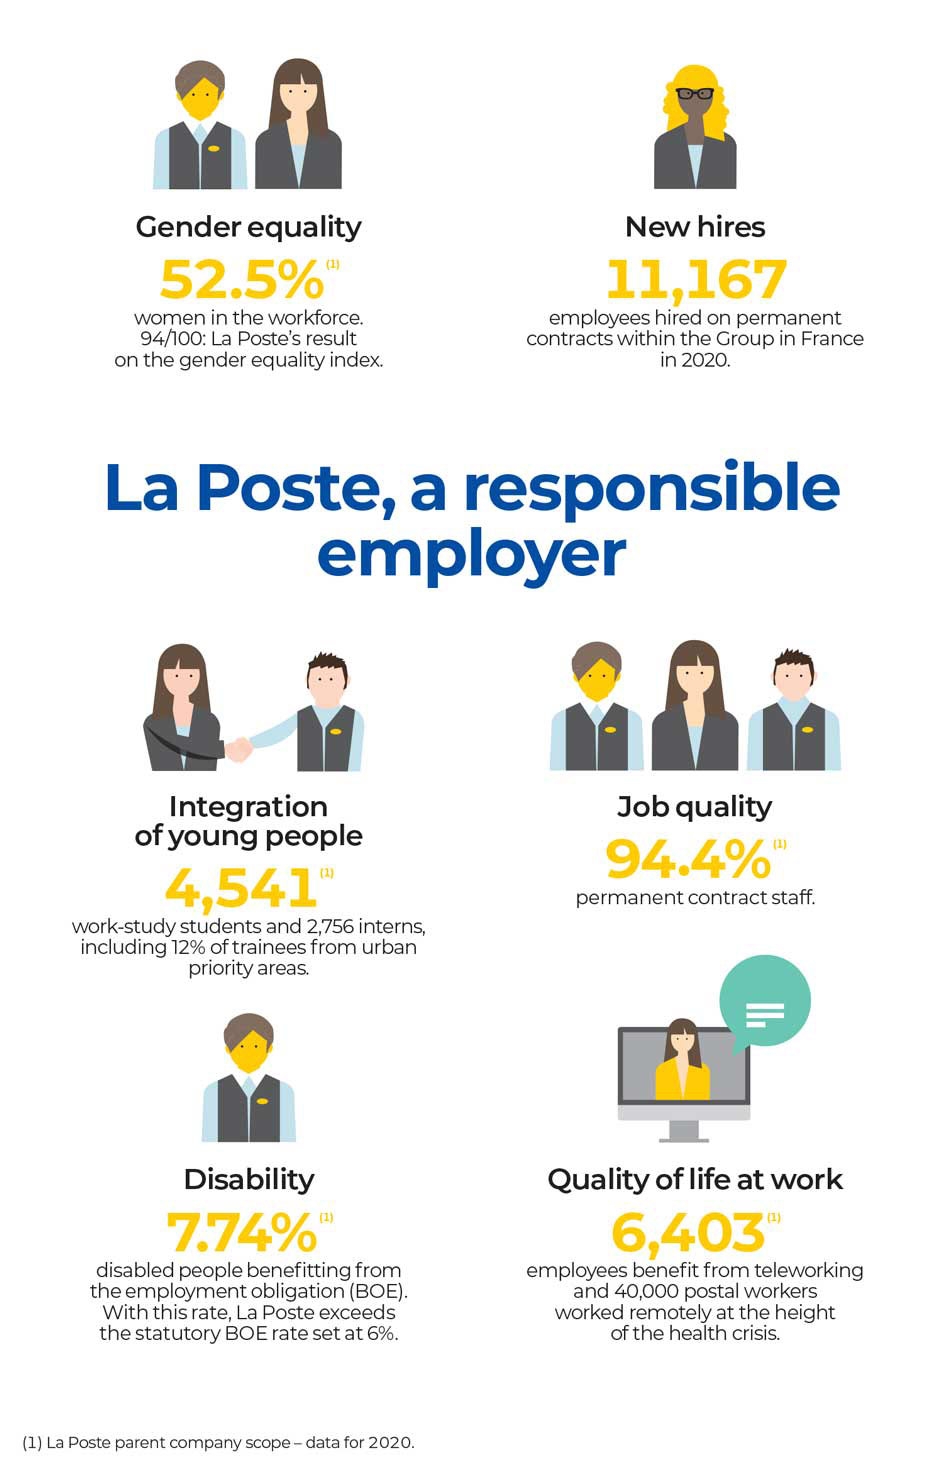 La Poste, an employer committed to social responsibility